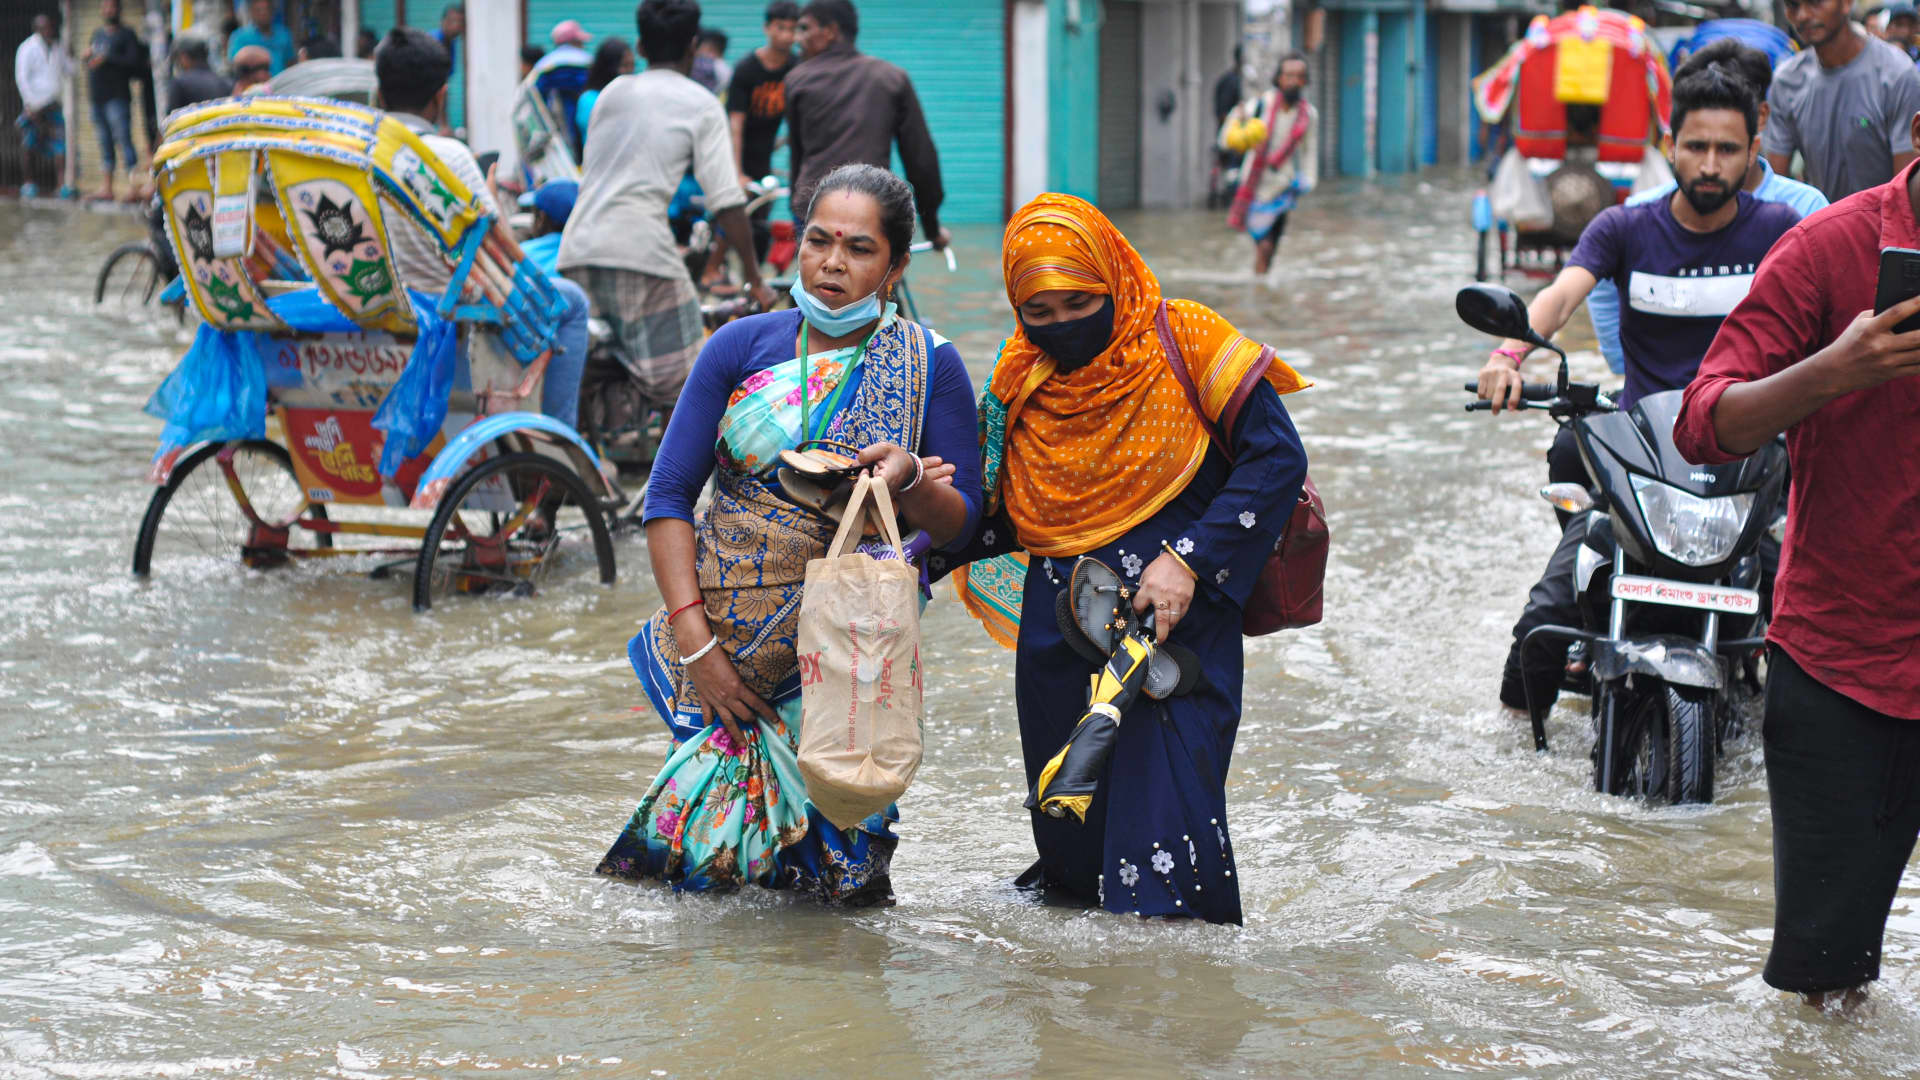 People wade through the floodwater, May 17, 2022 in Sylhet, Bangladesh. Many roads in Sylhet have been submerged due to continuous high rains for several days.